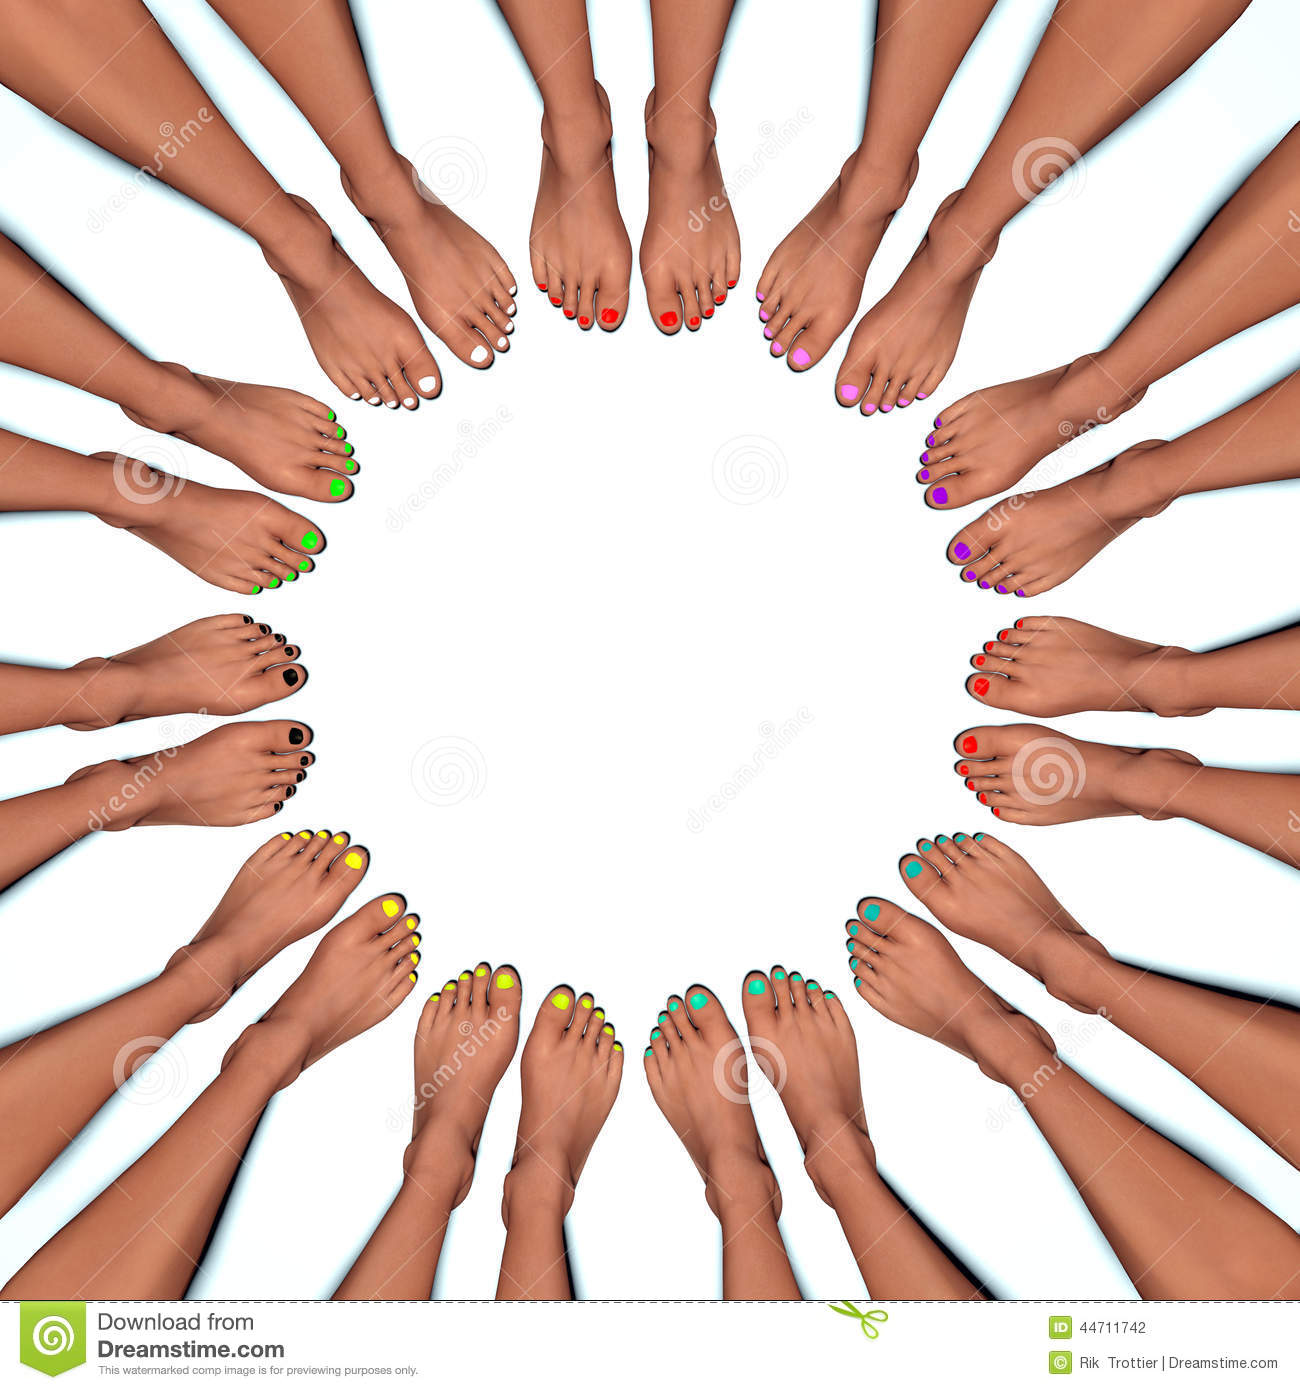 Circle Of Feet With Painted Toenails 